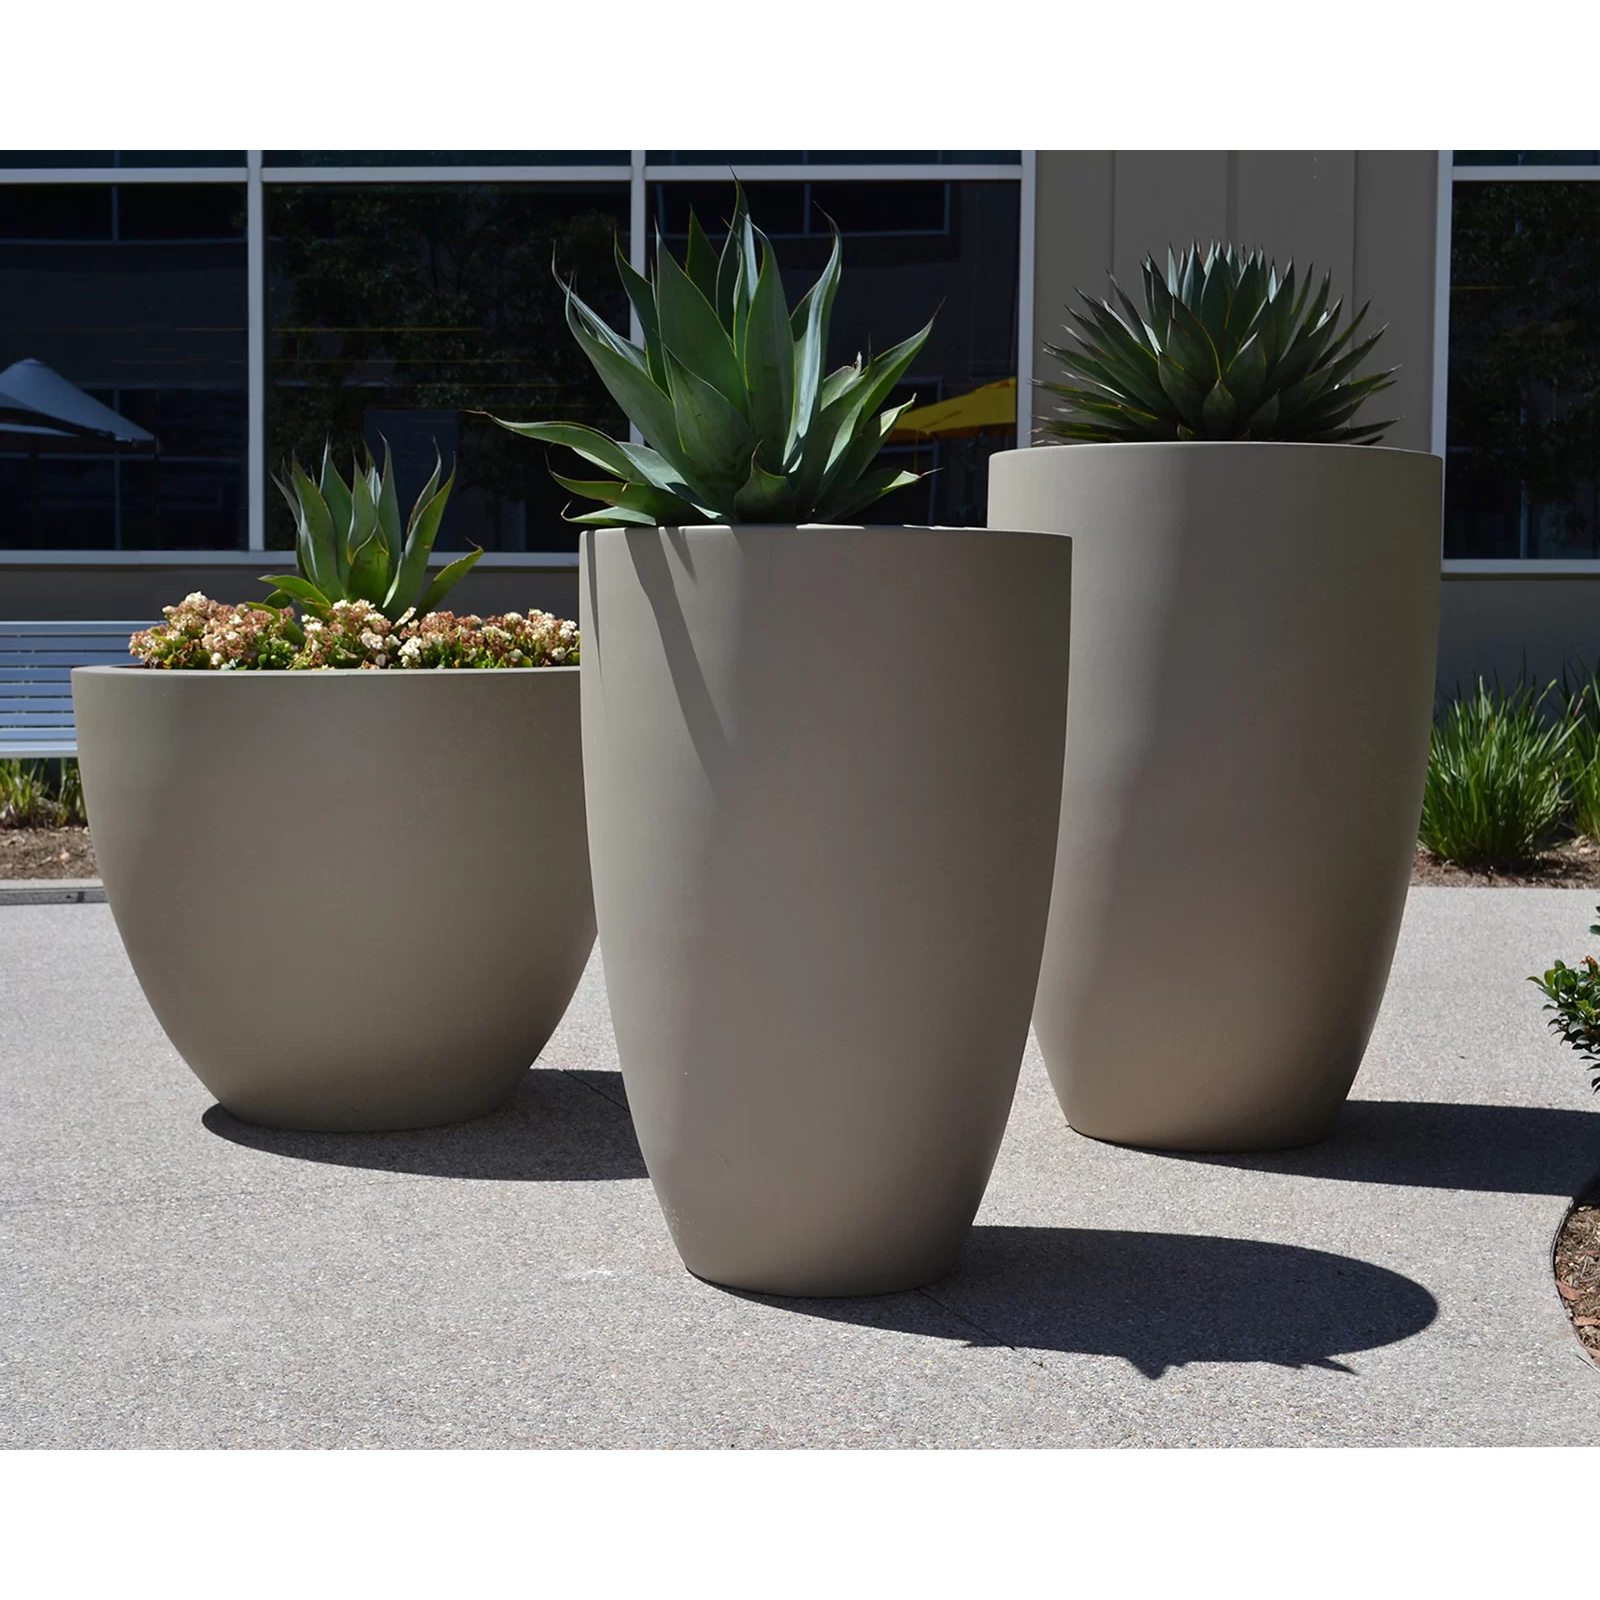 Archpot Legacy Round Tall Planter - Majestic Fountains